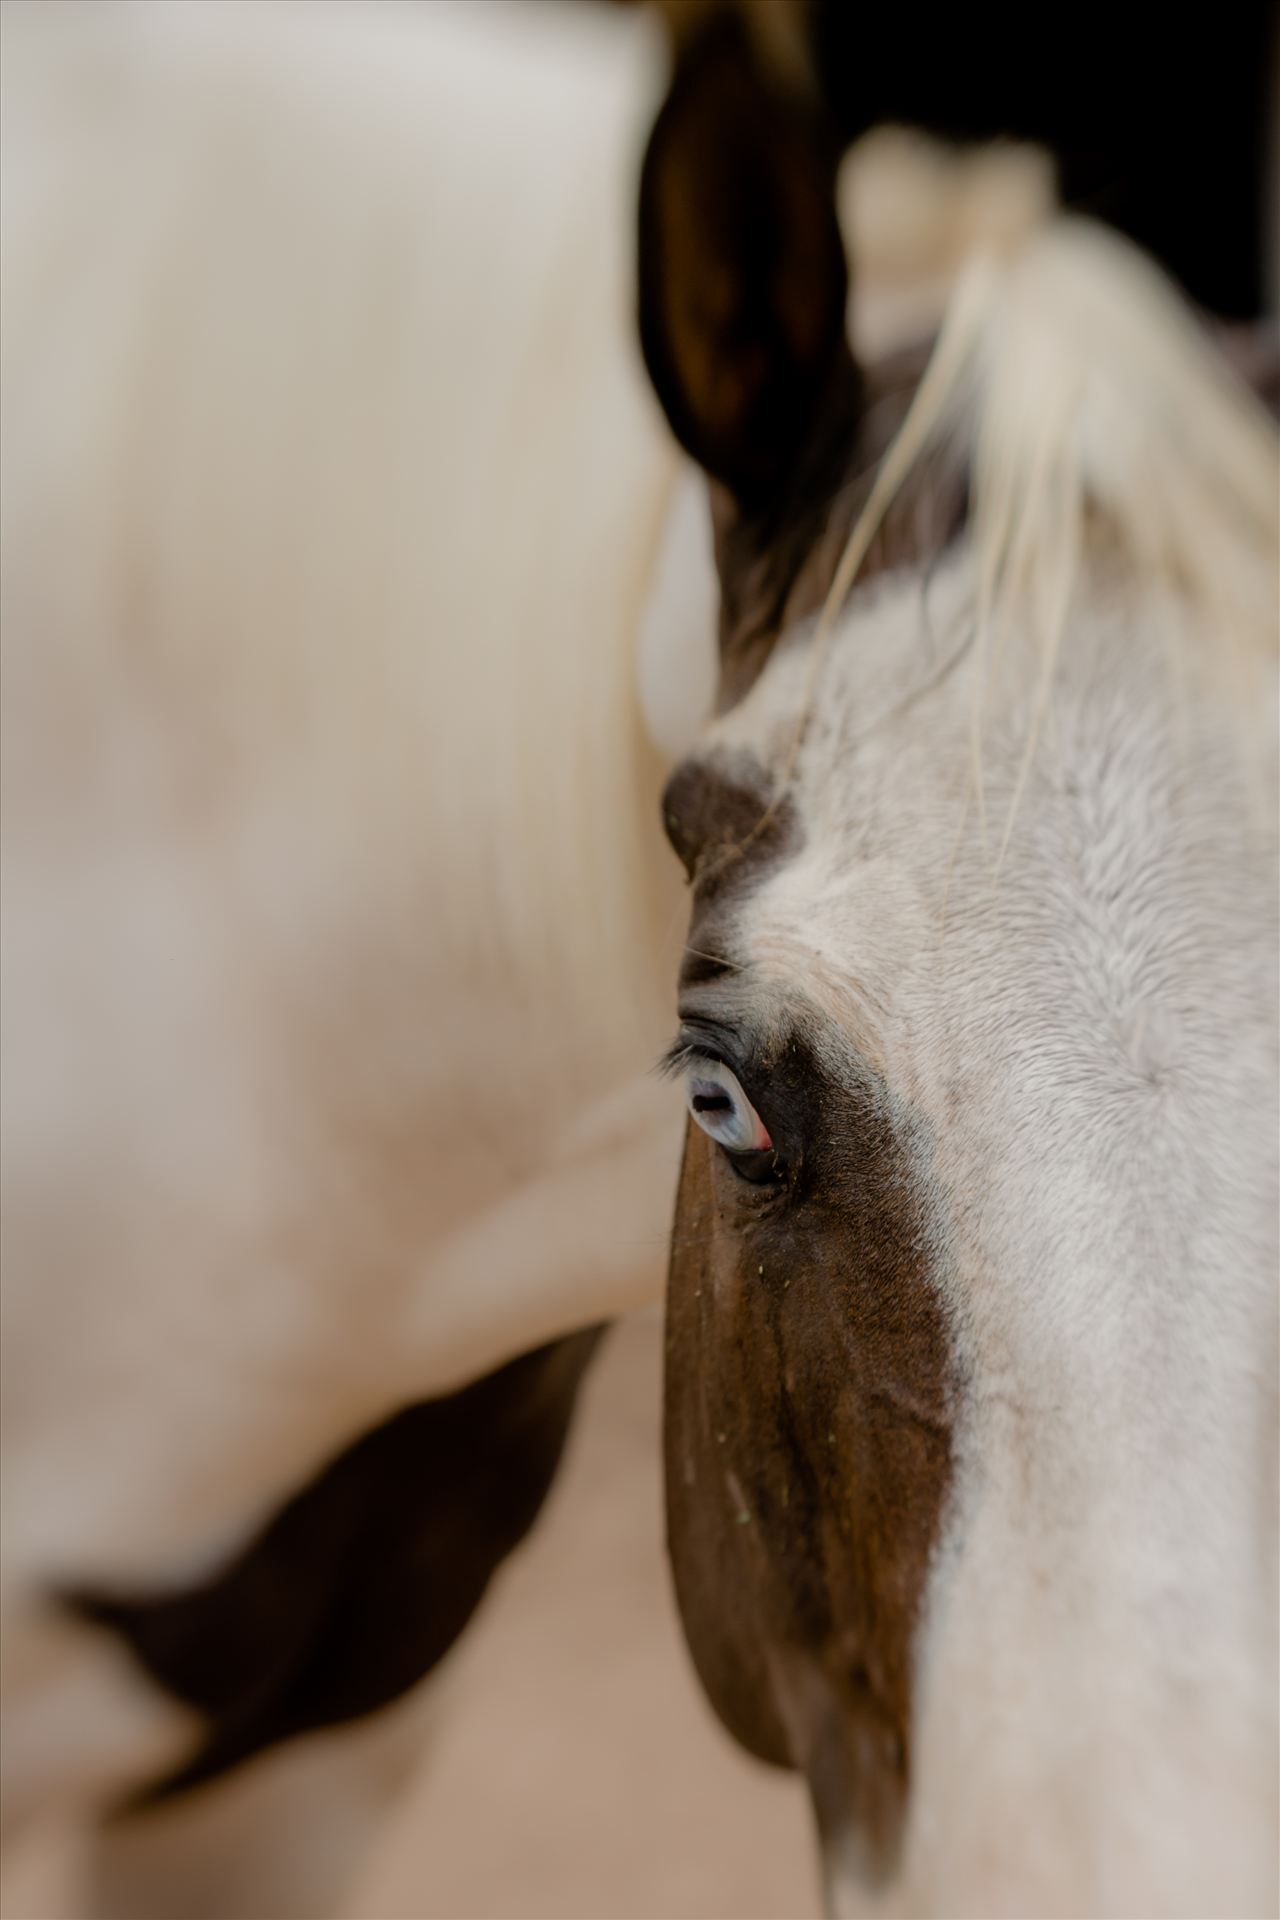 Blue Eyed Gal.jpg - Blue eyed paint horse posing for the camera.  Focus on the eye and artistically softened in camera to highlight patterns. by Sarah Williams